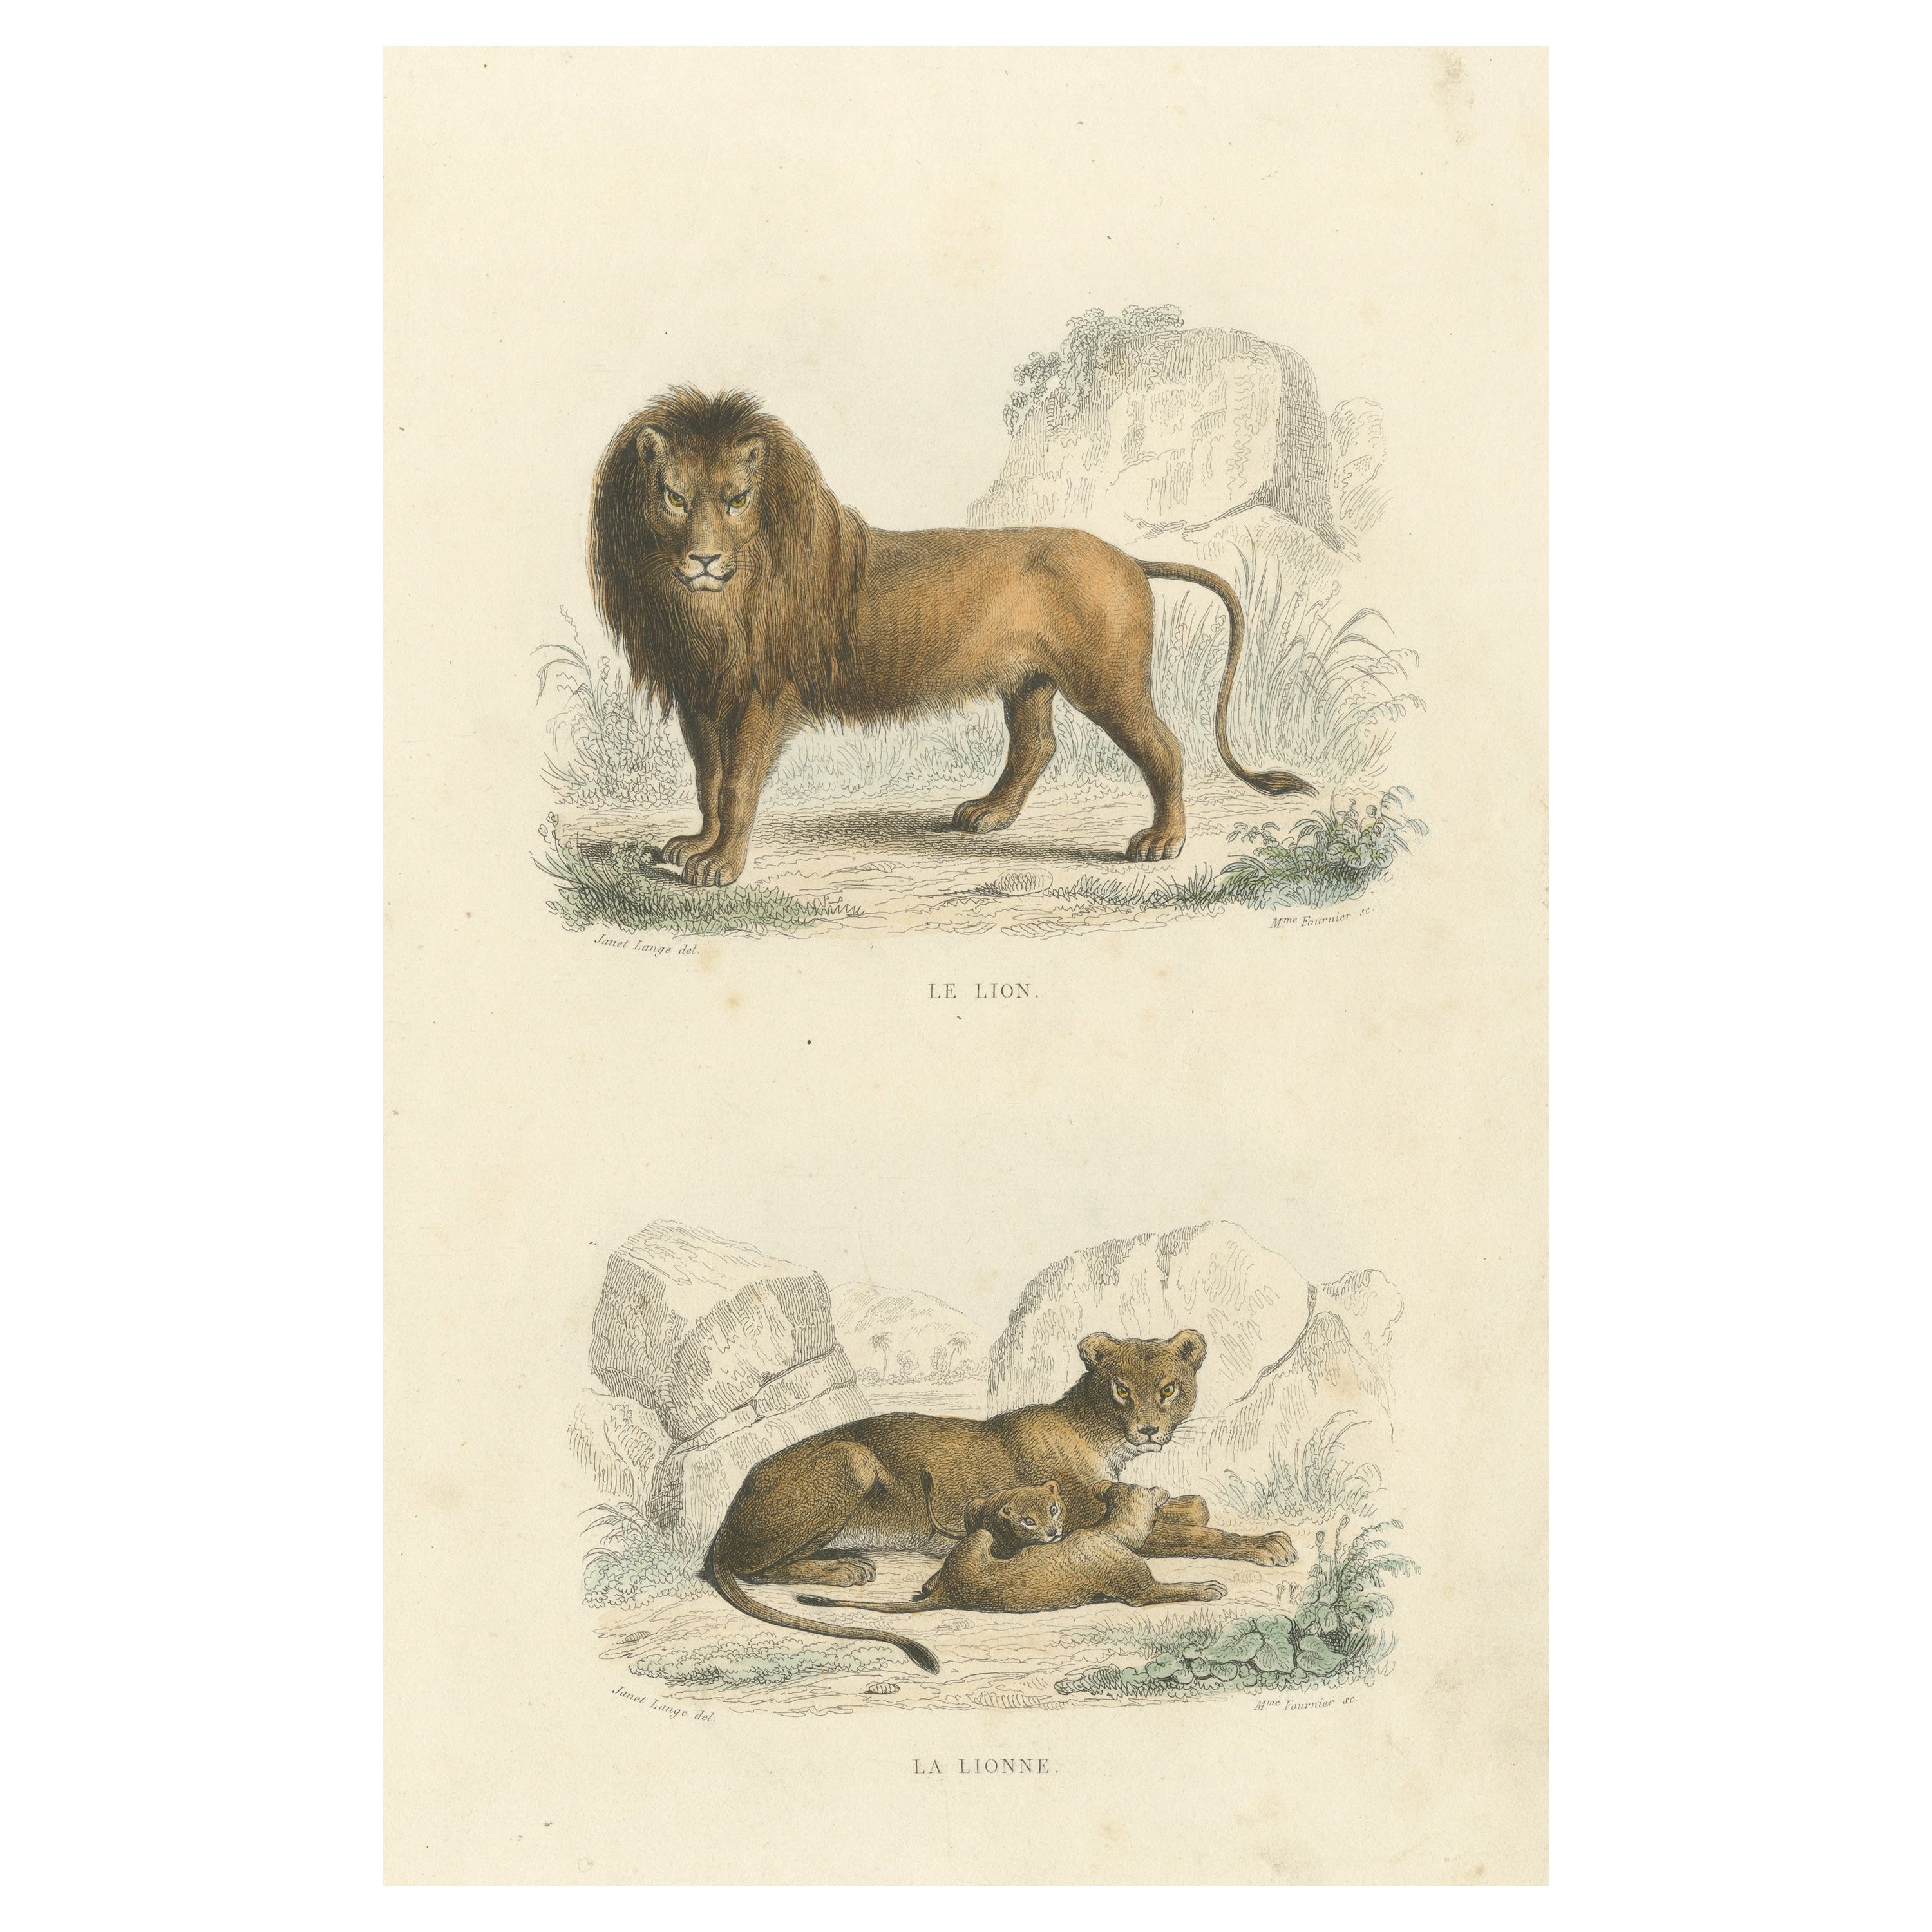 Two Images on One Sheet of a Lion and Lioness